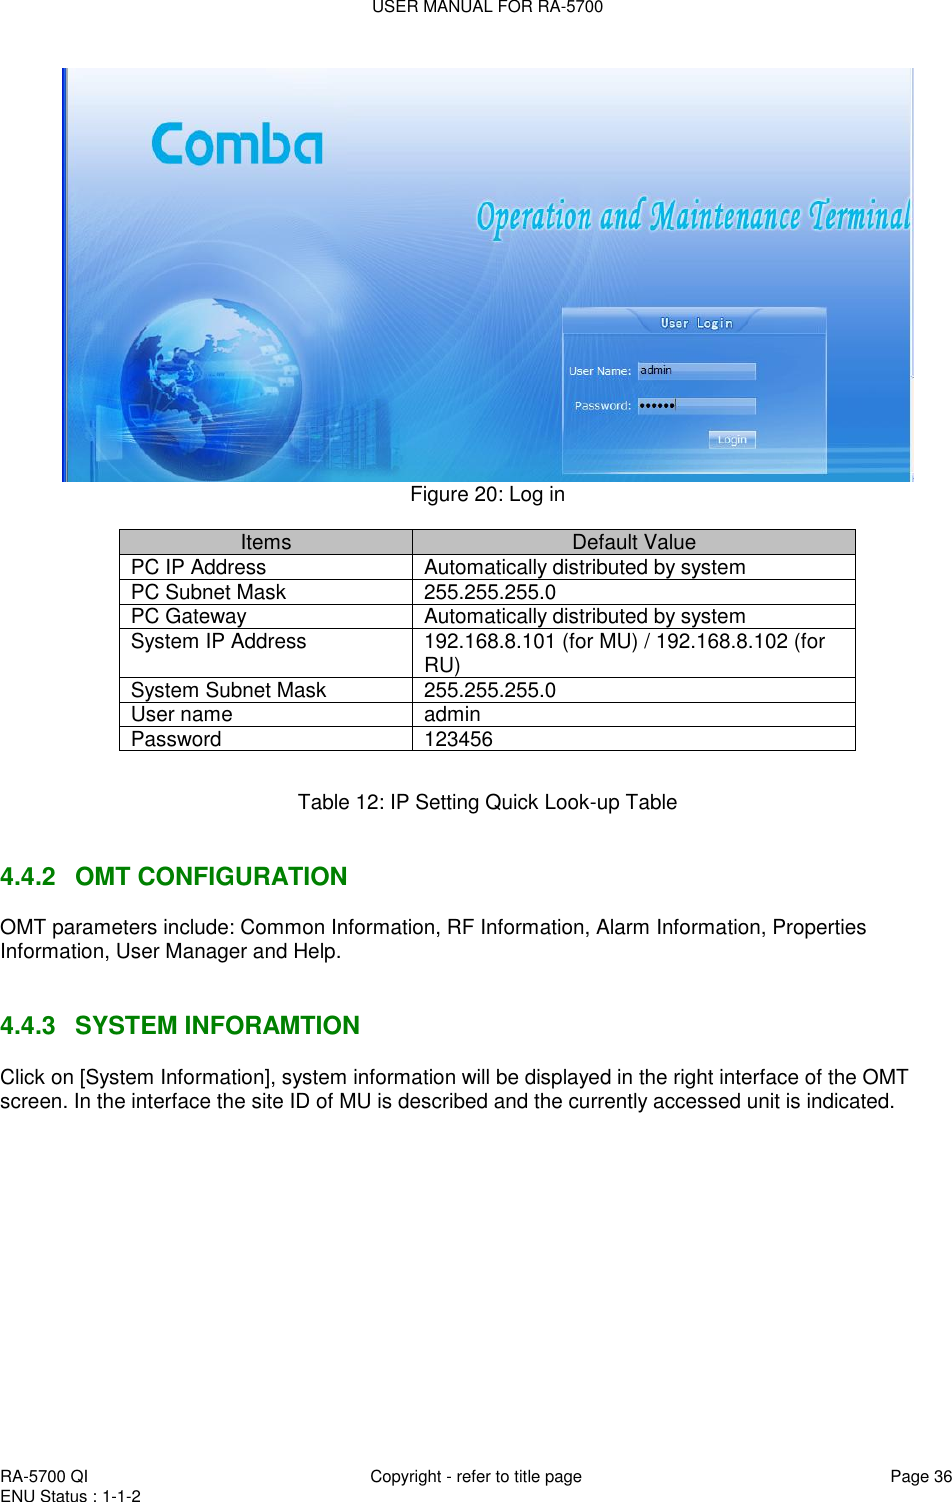 USER MANUAL FOR RA-5700  RA-5700 QI  Copyright - refer to title page Page 36 ENU Status : 1-1-2     Figure 20: Log in  Items Default Value PC IP Address Automatically distributed by system  PC Subnet Mask 255.255.255.0 PC Gateway Automatically distributed by system System IP Address 192.168.8.101 (for MU) / 192.168.8.102 (for RU) System Subnet Mask 255.255.255.0 User name admin Password 123456  Table 12: IP Setting Quick Look-up Table   4.4.2  OMT CONFIGURATION OMT parameters include: Common Information, RF Information, Alarm Information, Properties Information, User Manager and Help.    4.4.3  SYSTEM INFORAMTION Click on [System Information], system information will be displayed in the right interface of the OMT screen. In the interface the site ID of MU is described and the currently accessed unit is indicated.  